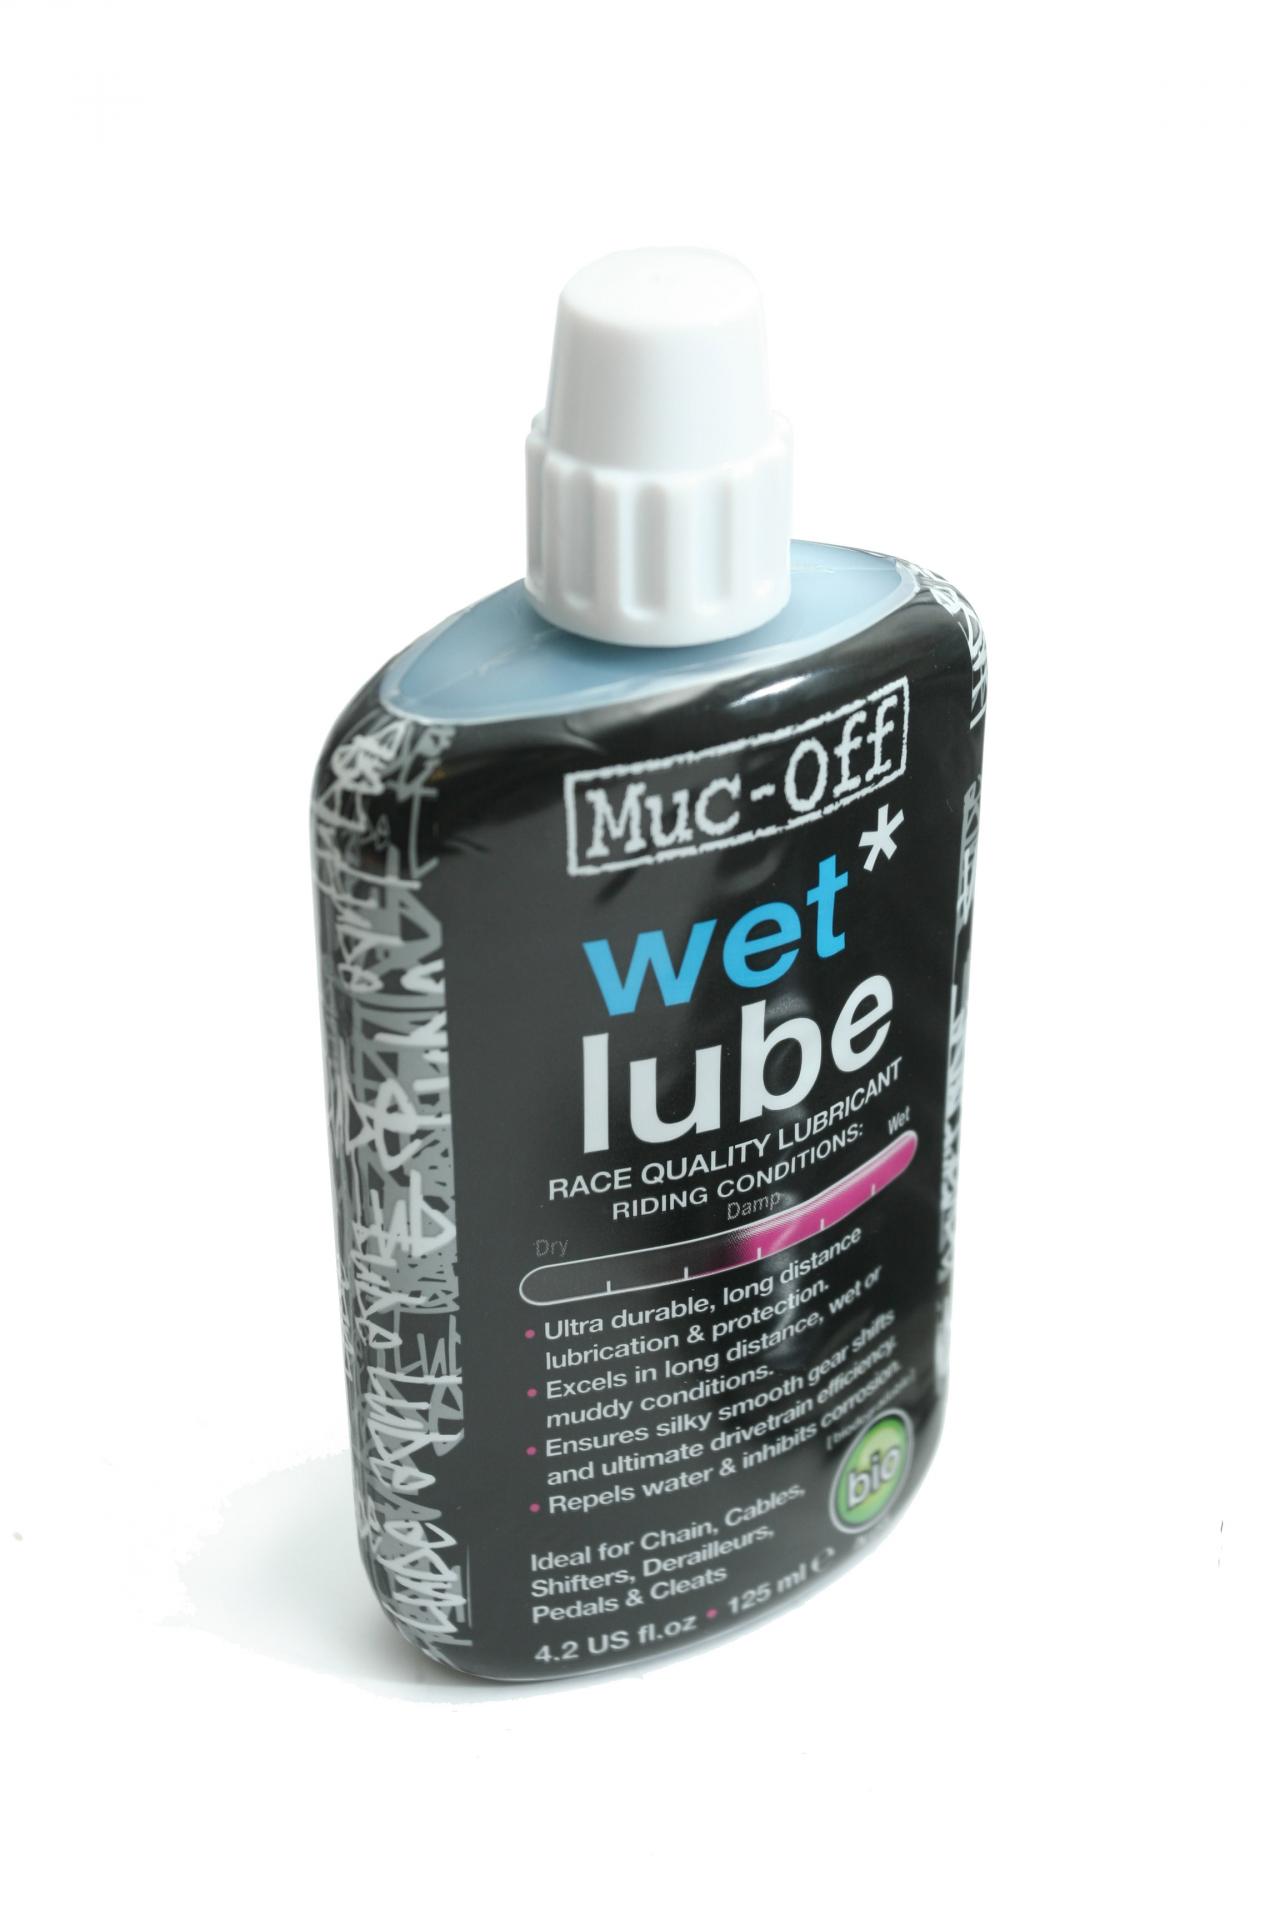 Review: Muc-Off Wet Lube